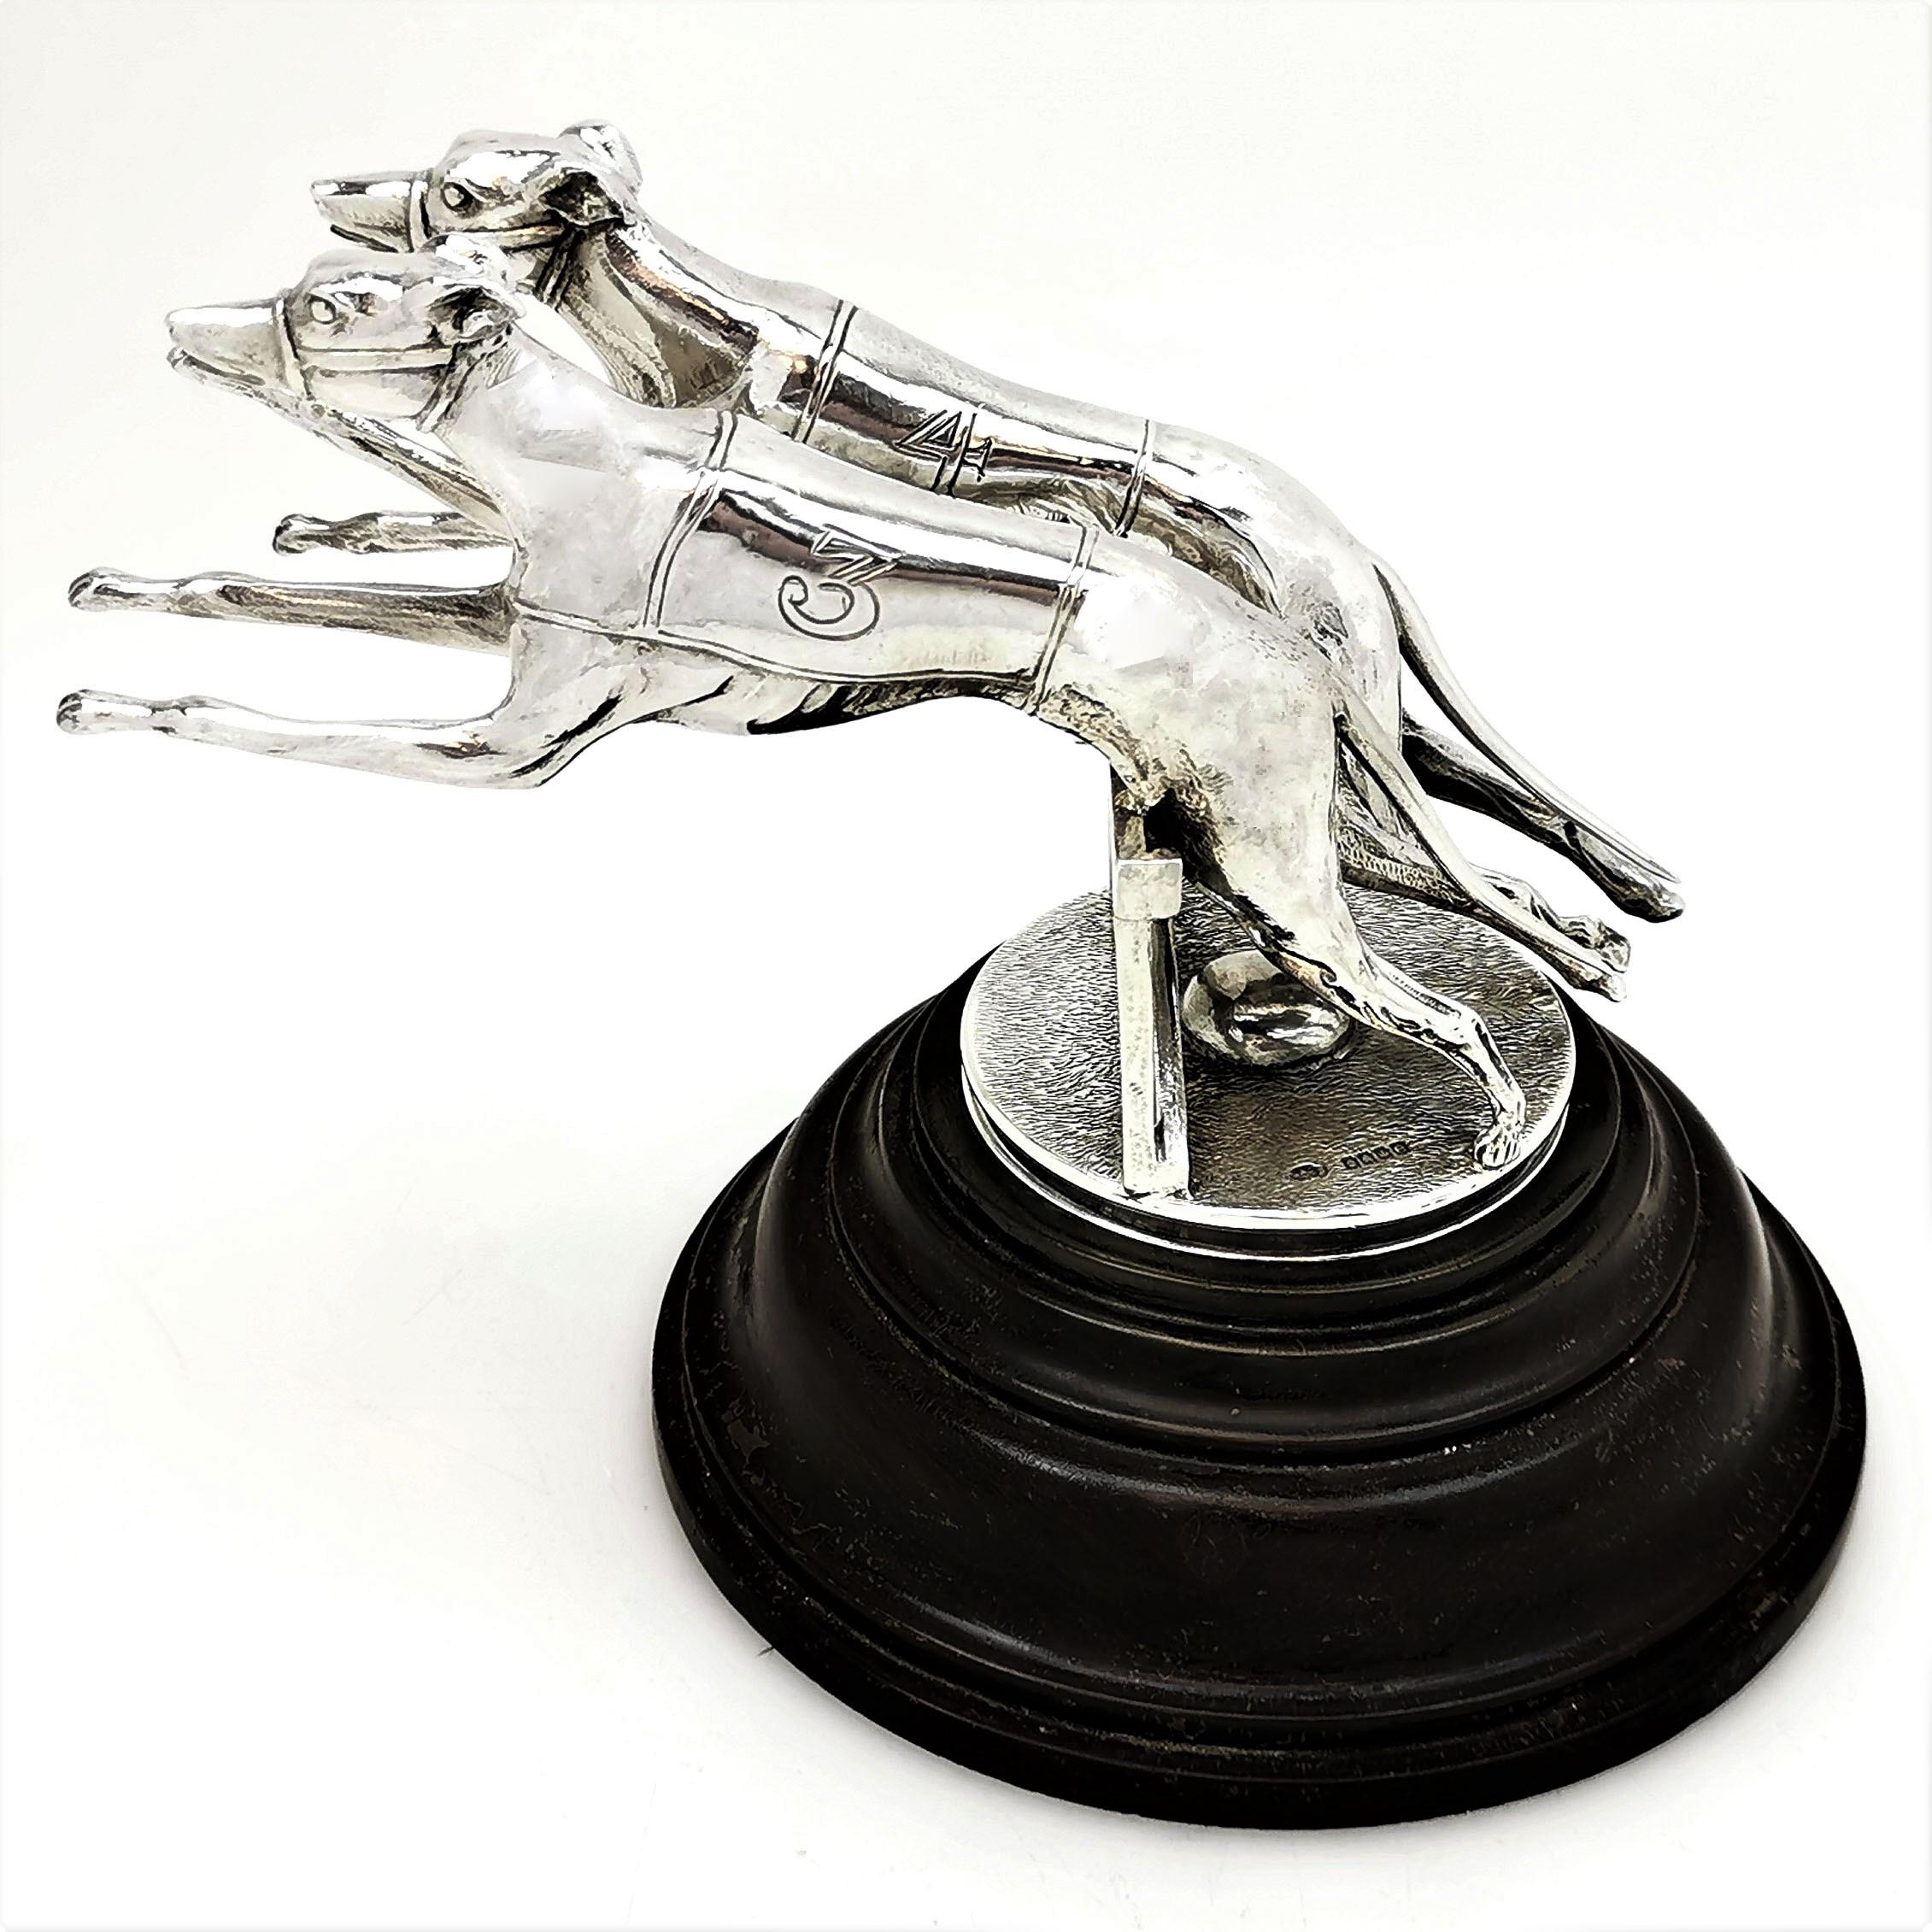 A lovely pair of solid Silver Greyhounds leaping over a hurdle mid race. This sterling silver model of Greyhound Dogs stands on a dark wooden circular plinth. These Greyhounds are created with a wonderful attention to detail, including racing